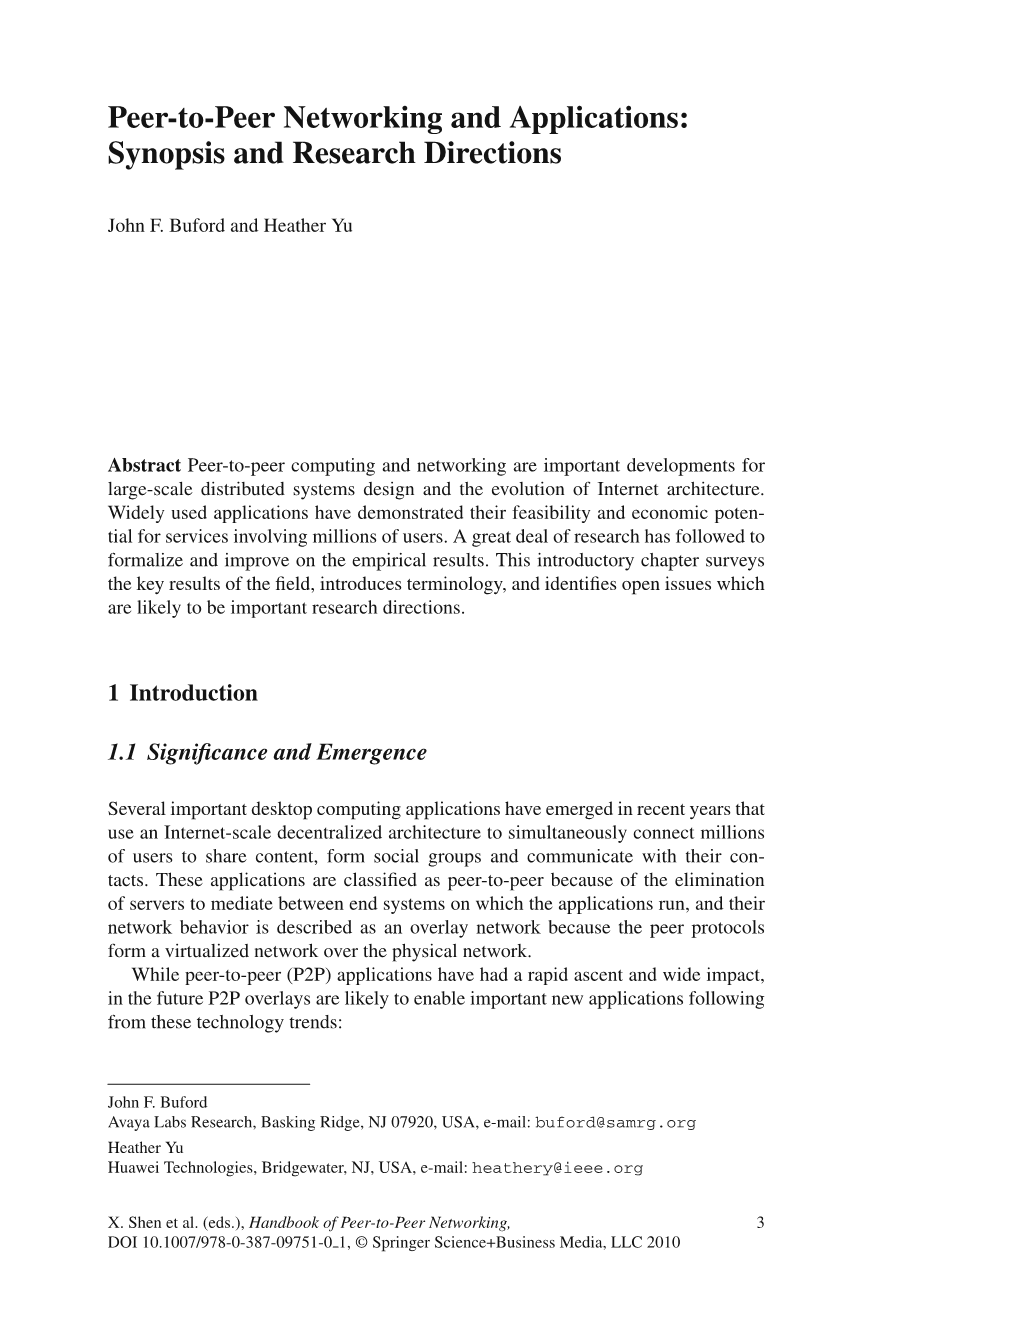 Peer-To-Peer Networking and Applications: Synopsis and Research Directions